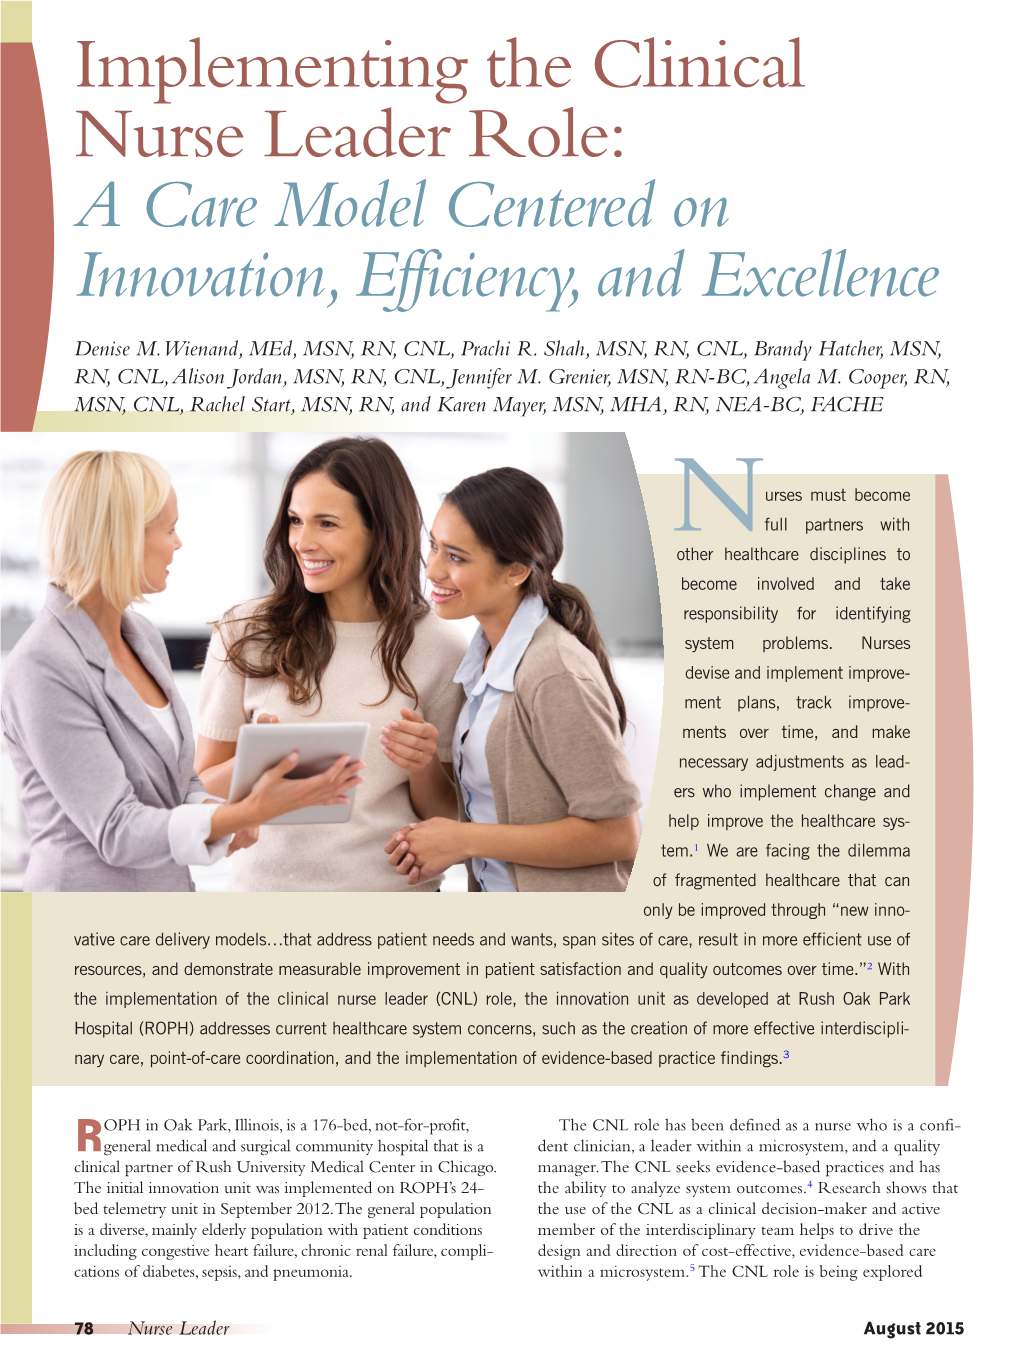 Implementing the Clinical Nurse Leader Role: a Care Model Centered on Innovation, Efficiency, and Excellence